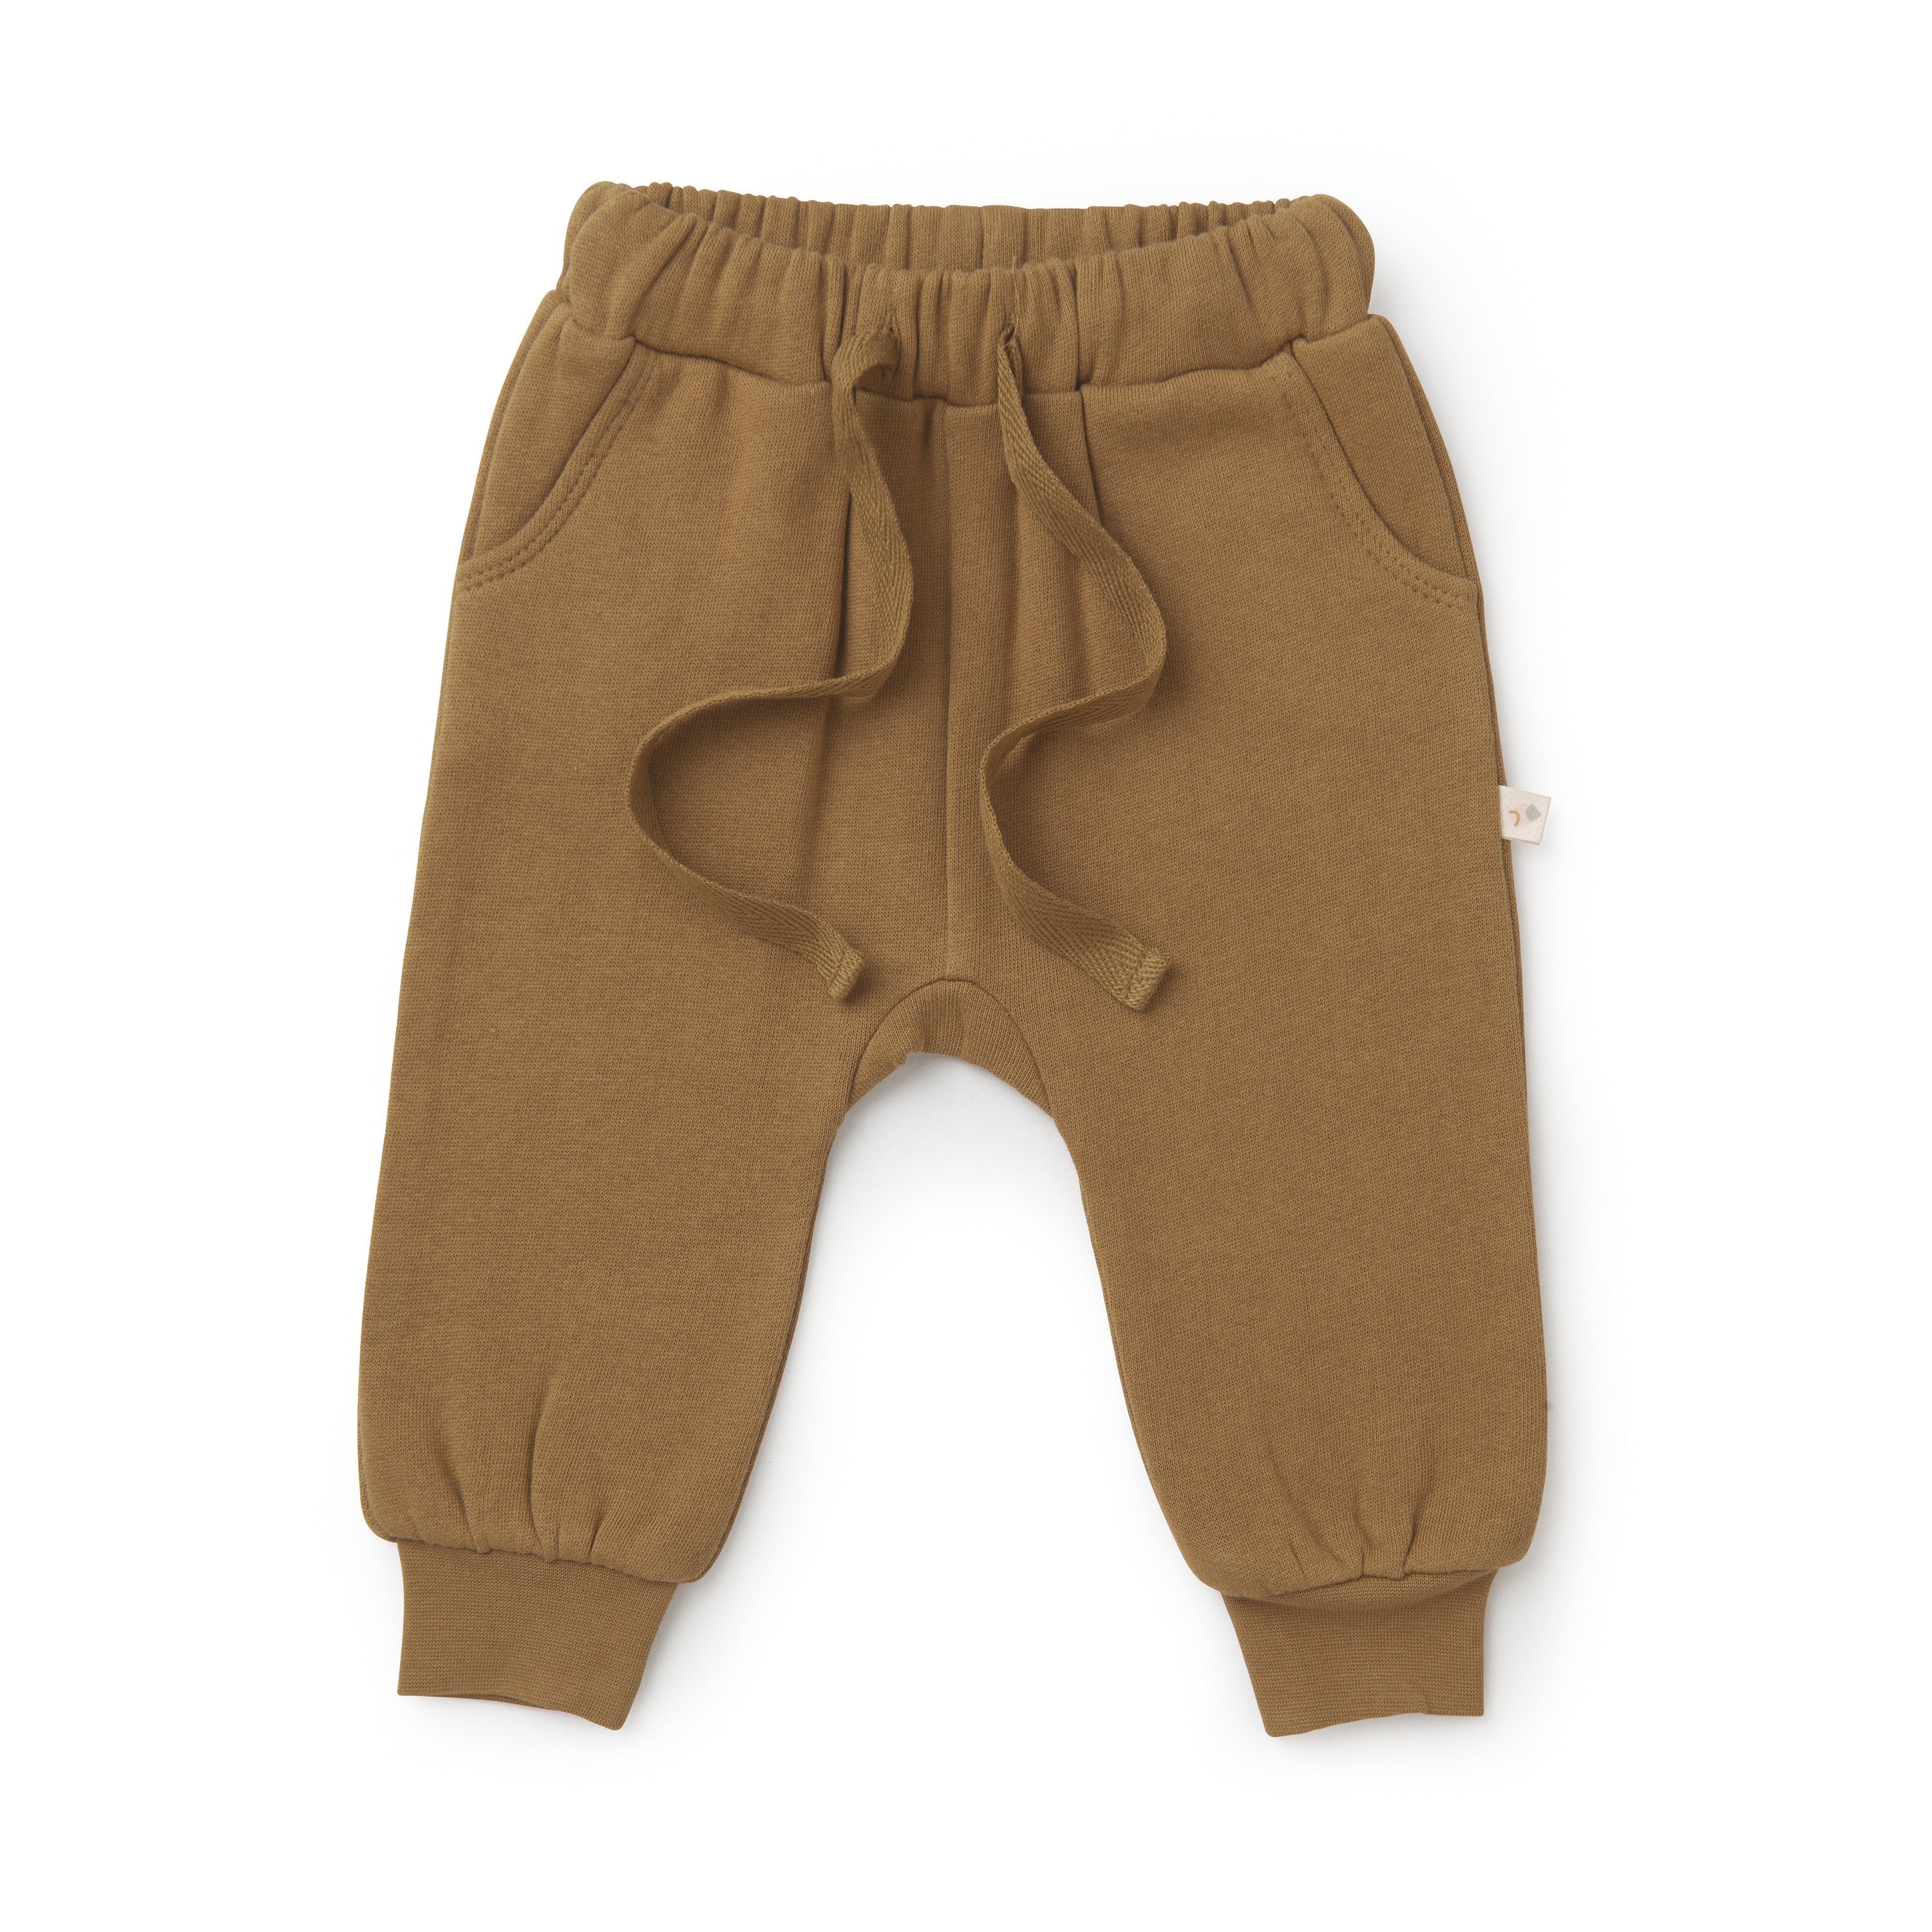 A pair of Organic Jogger Pants - Tan from Organic Baby with an elastic waistband and drawstring, displayed on a white background.